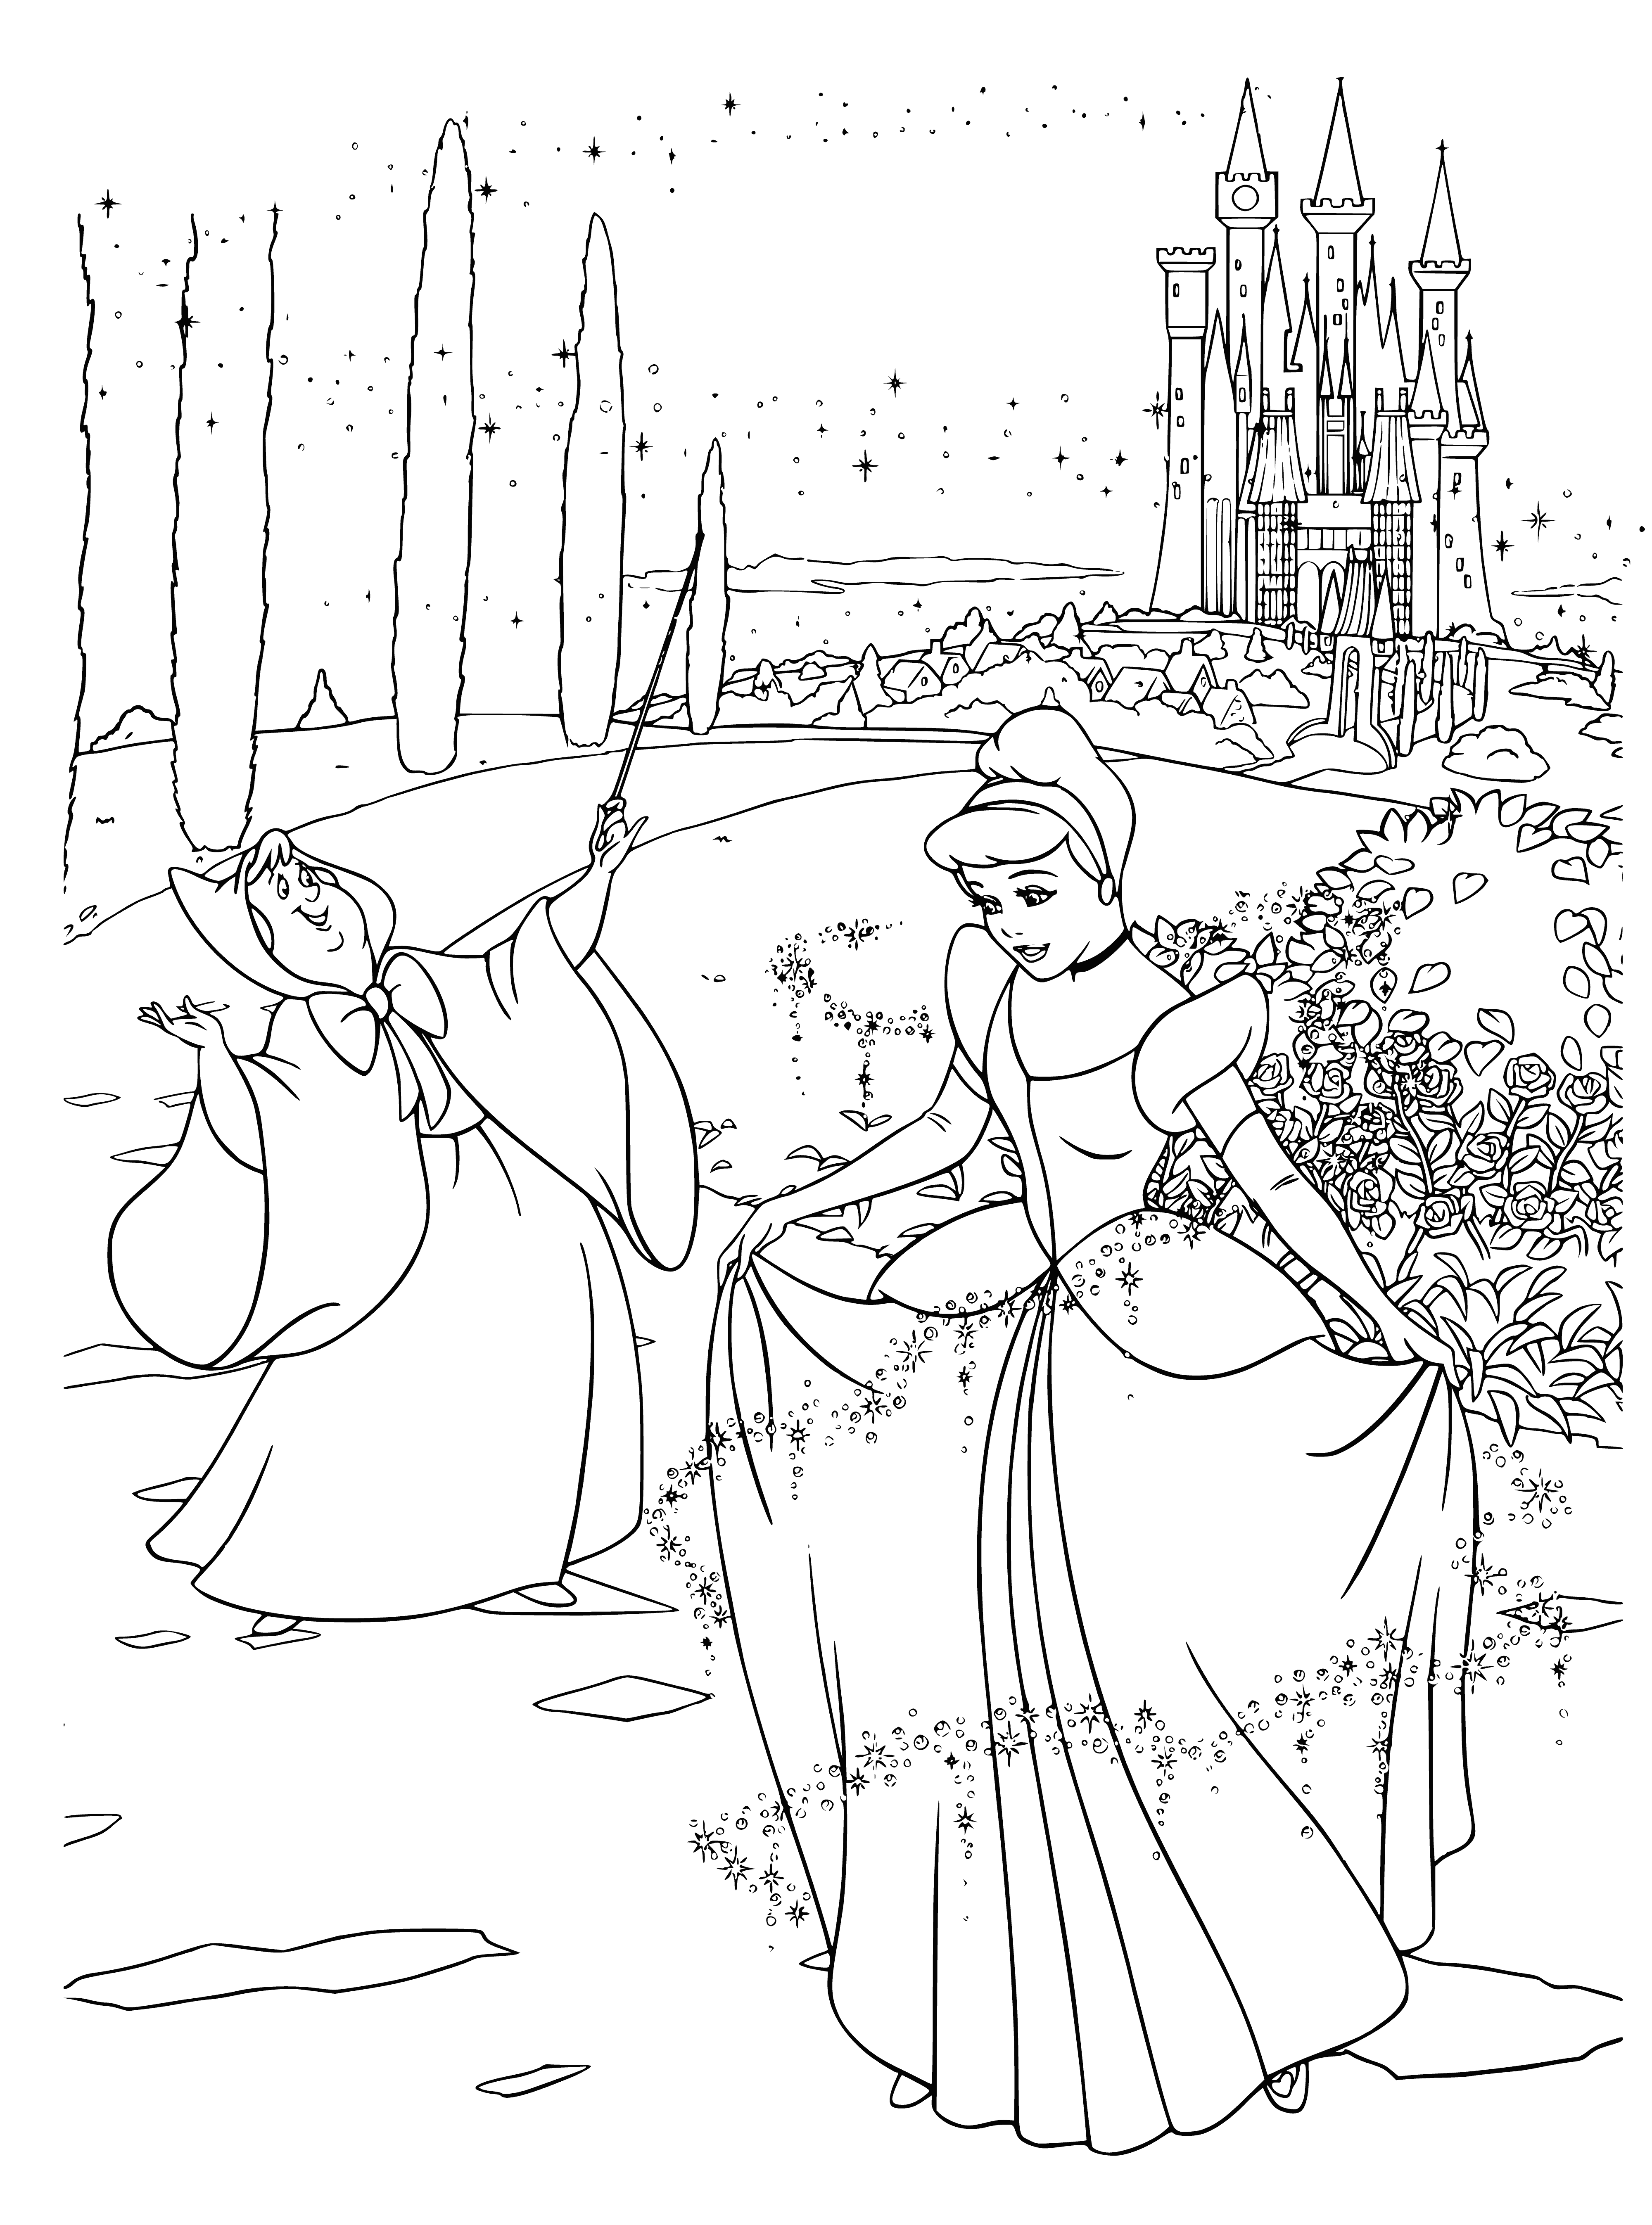 coloring page: Cinderella's old dress is transformed into a beautiful new gown with shimmering fabric, blue sash, low neckline, and slim skirt. Feet are bare.